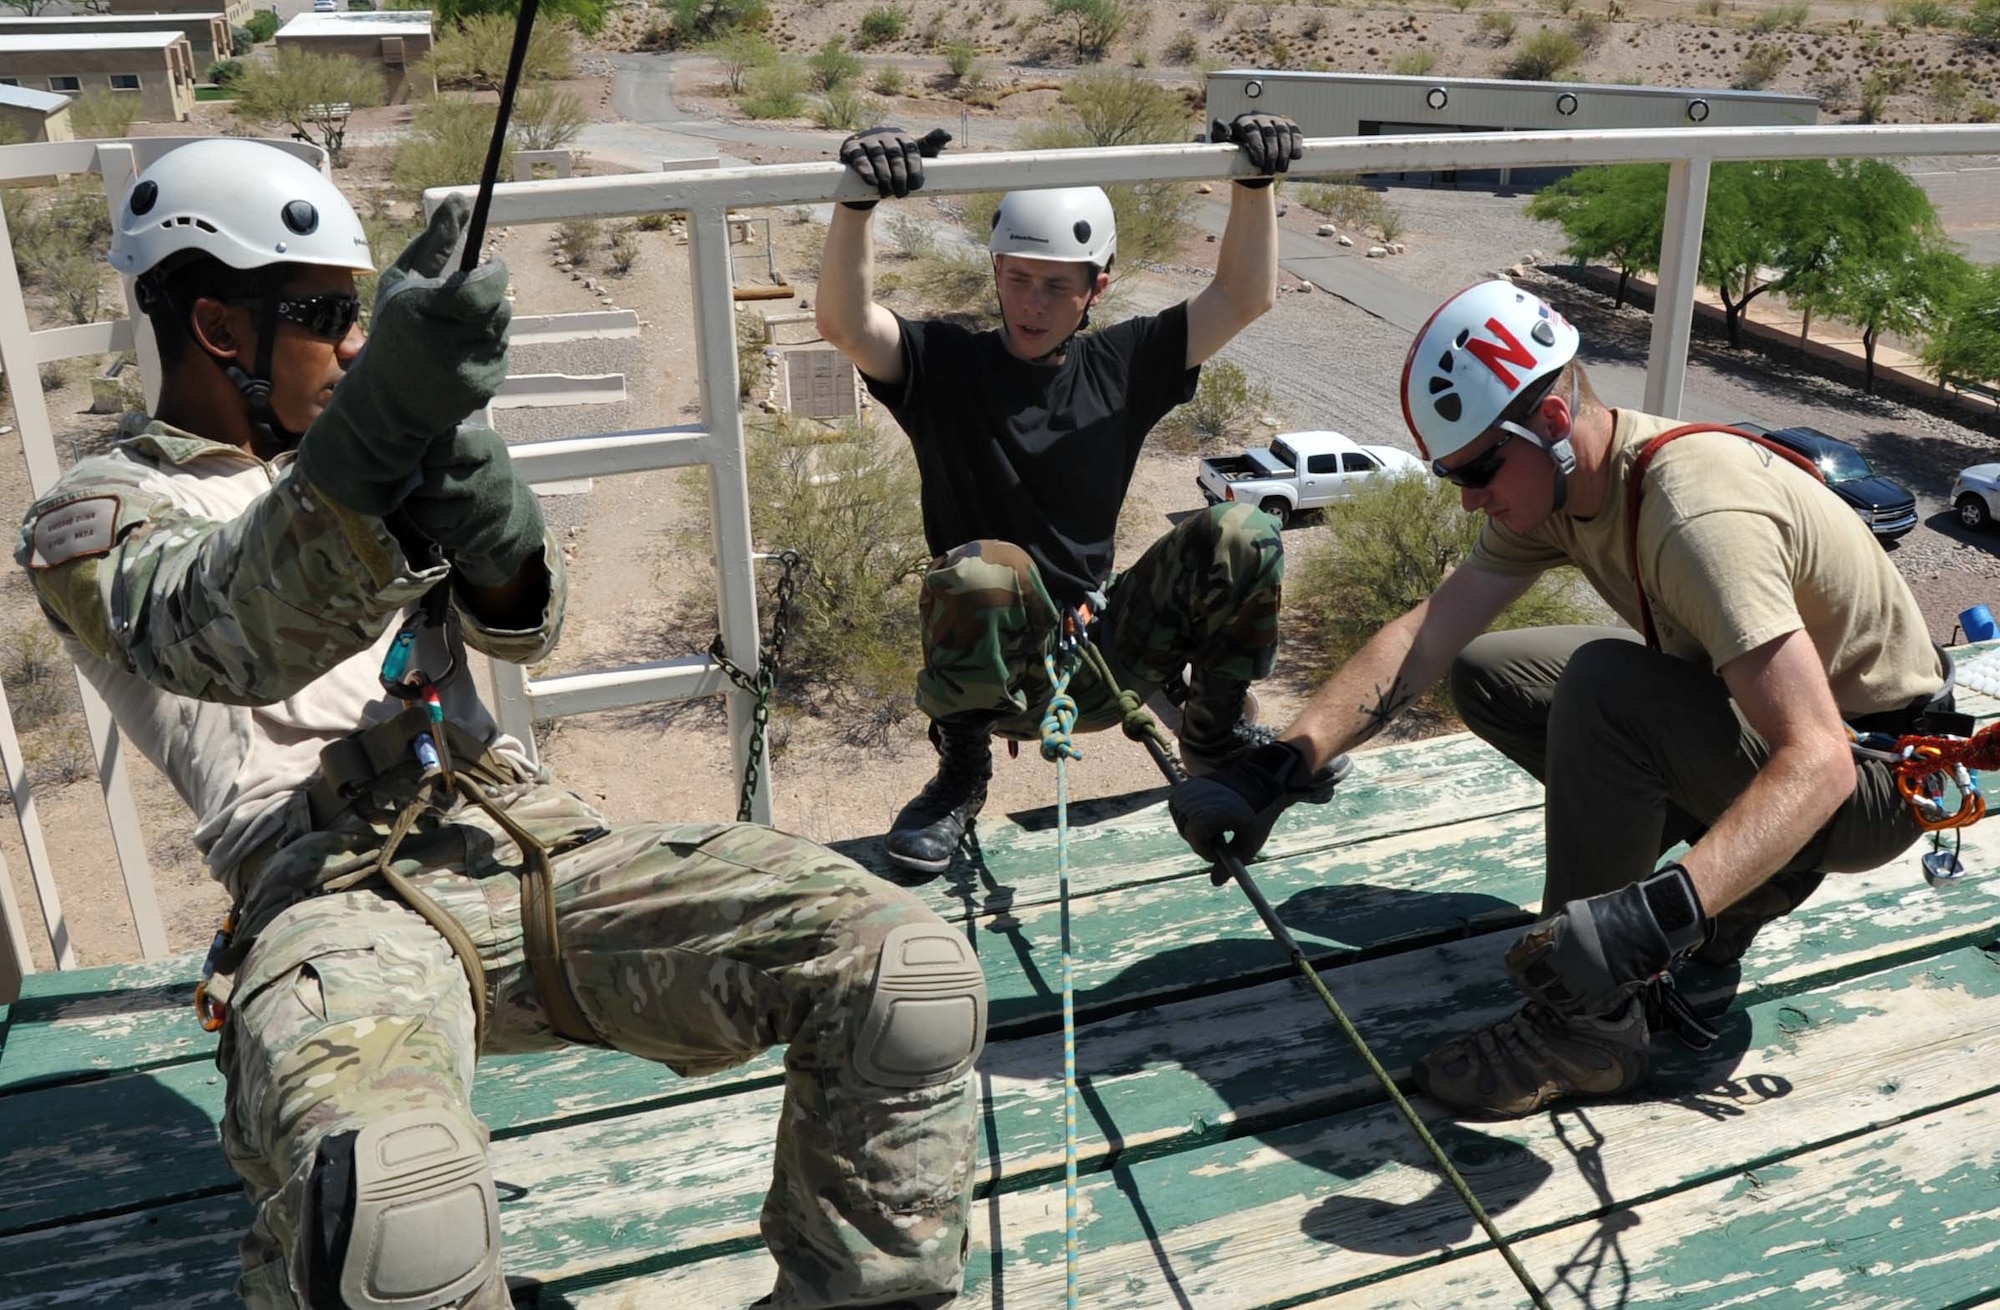 Staff Sgt. Richard Dunn, pararescueman with the 306th Rescue Squadron provided instruction on proper repelling techniques to Civil Air Patrol Cadets at the Pima County Rescue Training Center as part of the Advanced Pararescue Orientation Couse, a 10 day course that introduces CAP cadets to the operational PJ career field. (U.S. Air Force photo/ Master Sgt. Luke Johnson)